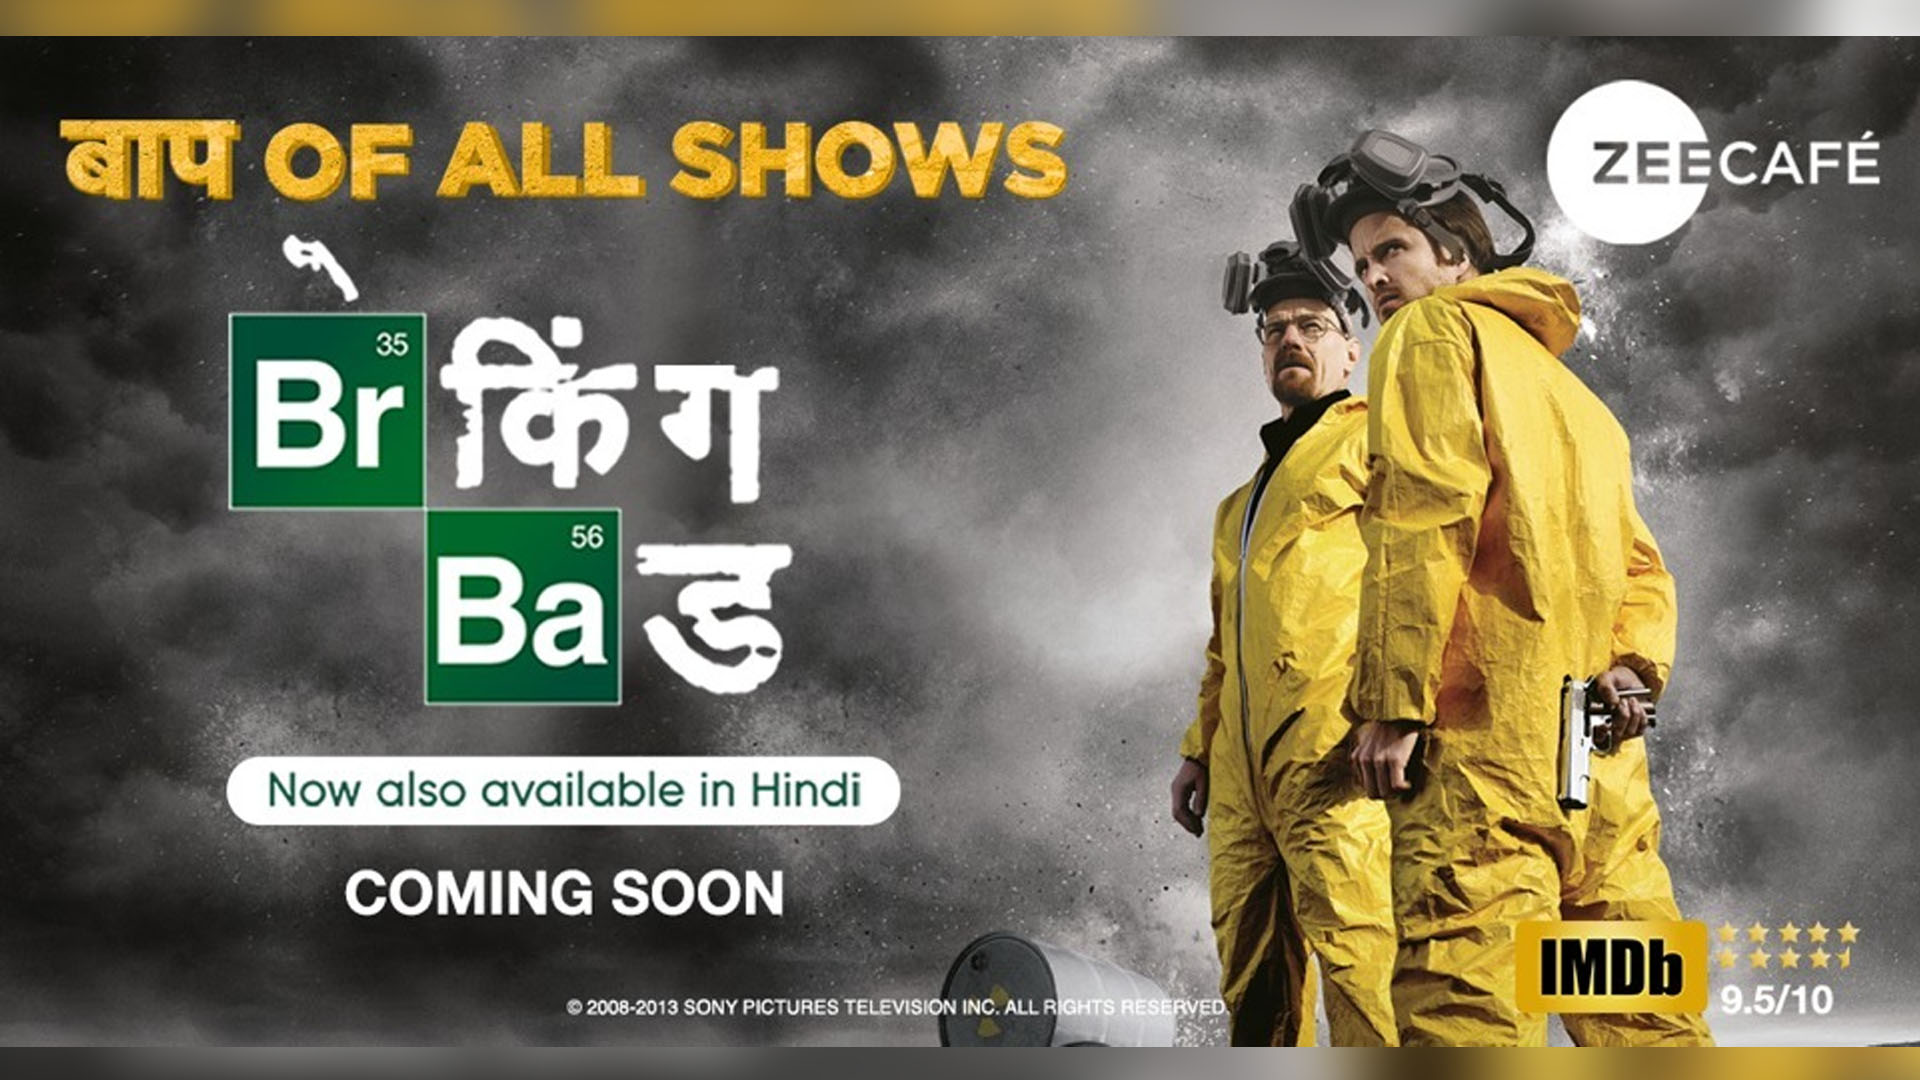 The Baap of all shows is here- Zee Café announces Breaking Bad in Hindi